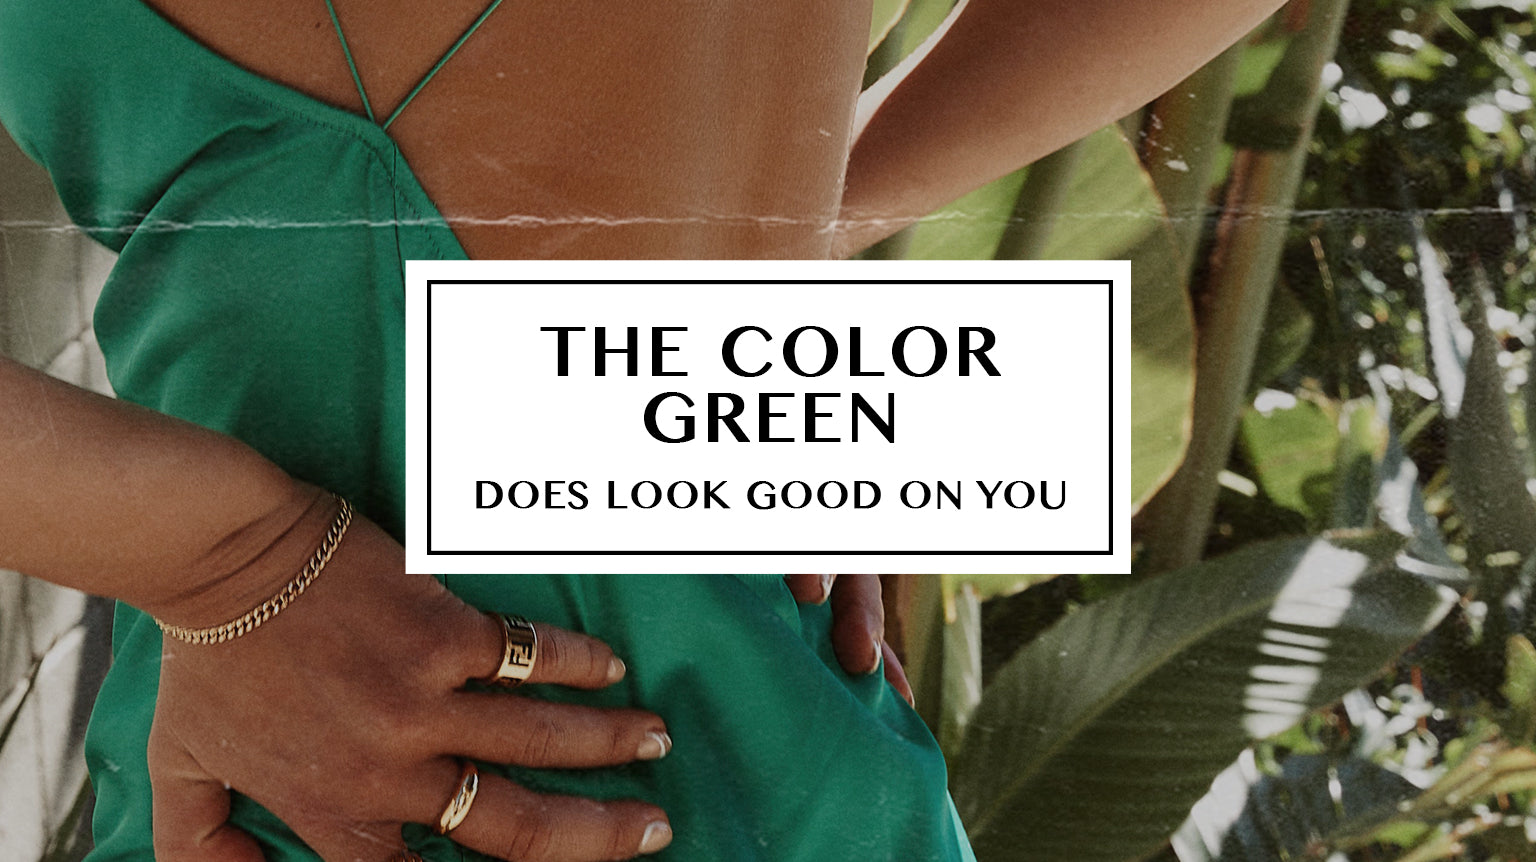 The Color Green: Does Look Good on You